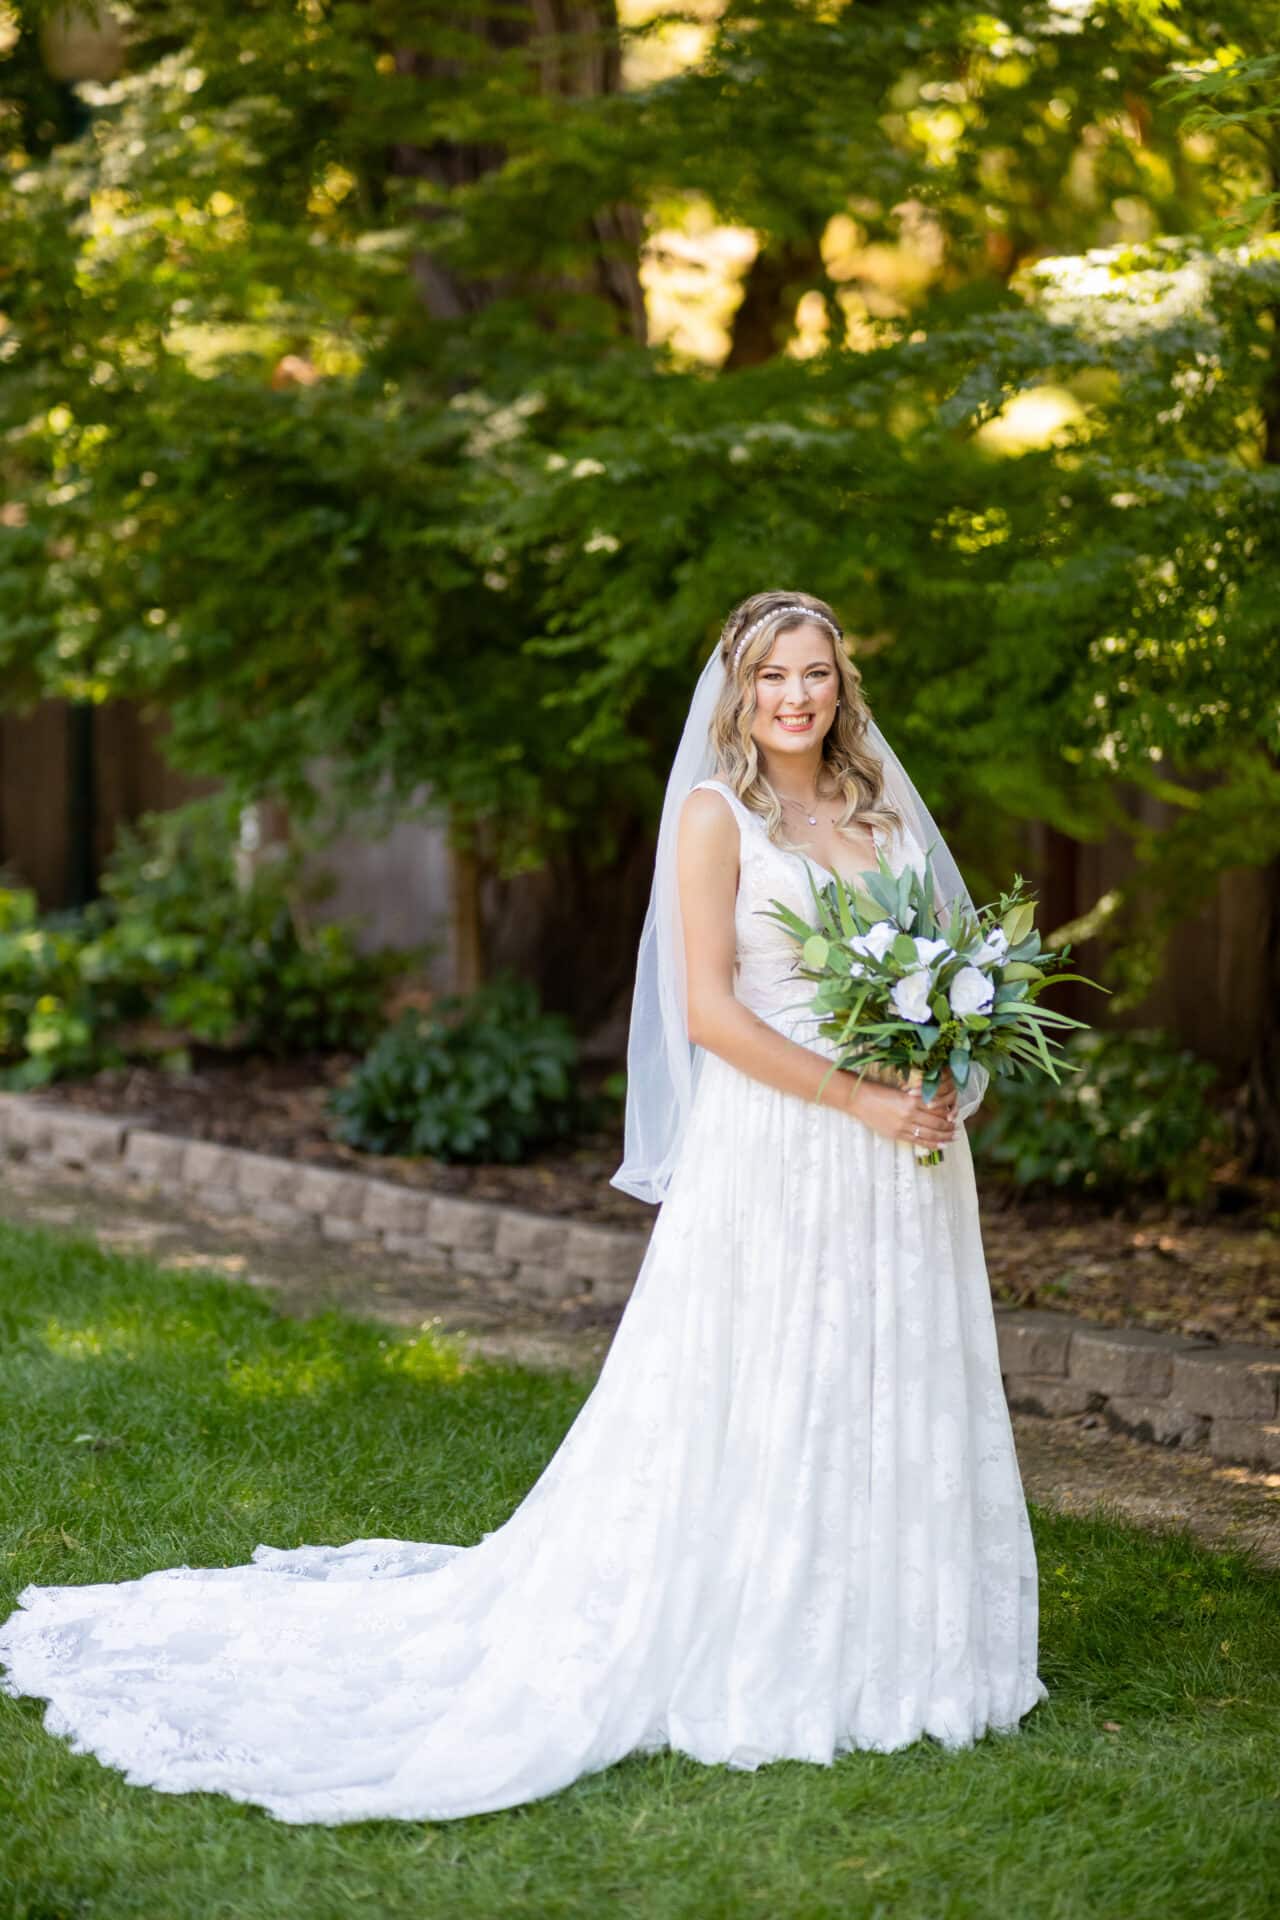 Bride with Greenery and White Rosebud Bouquet